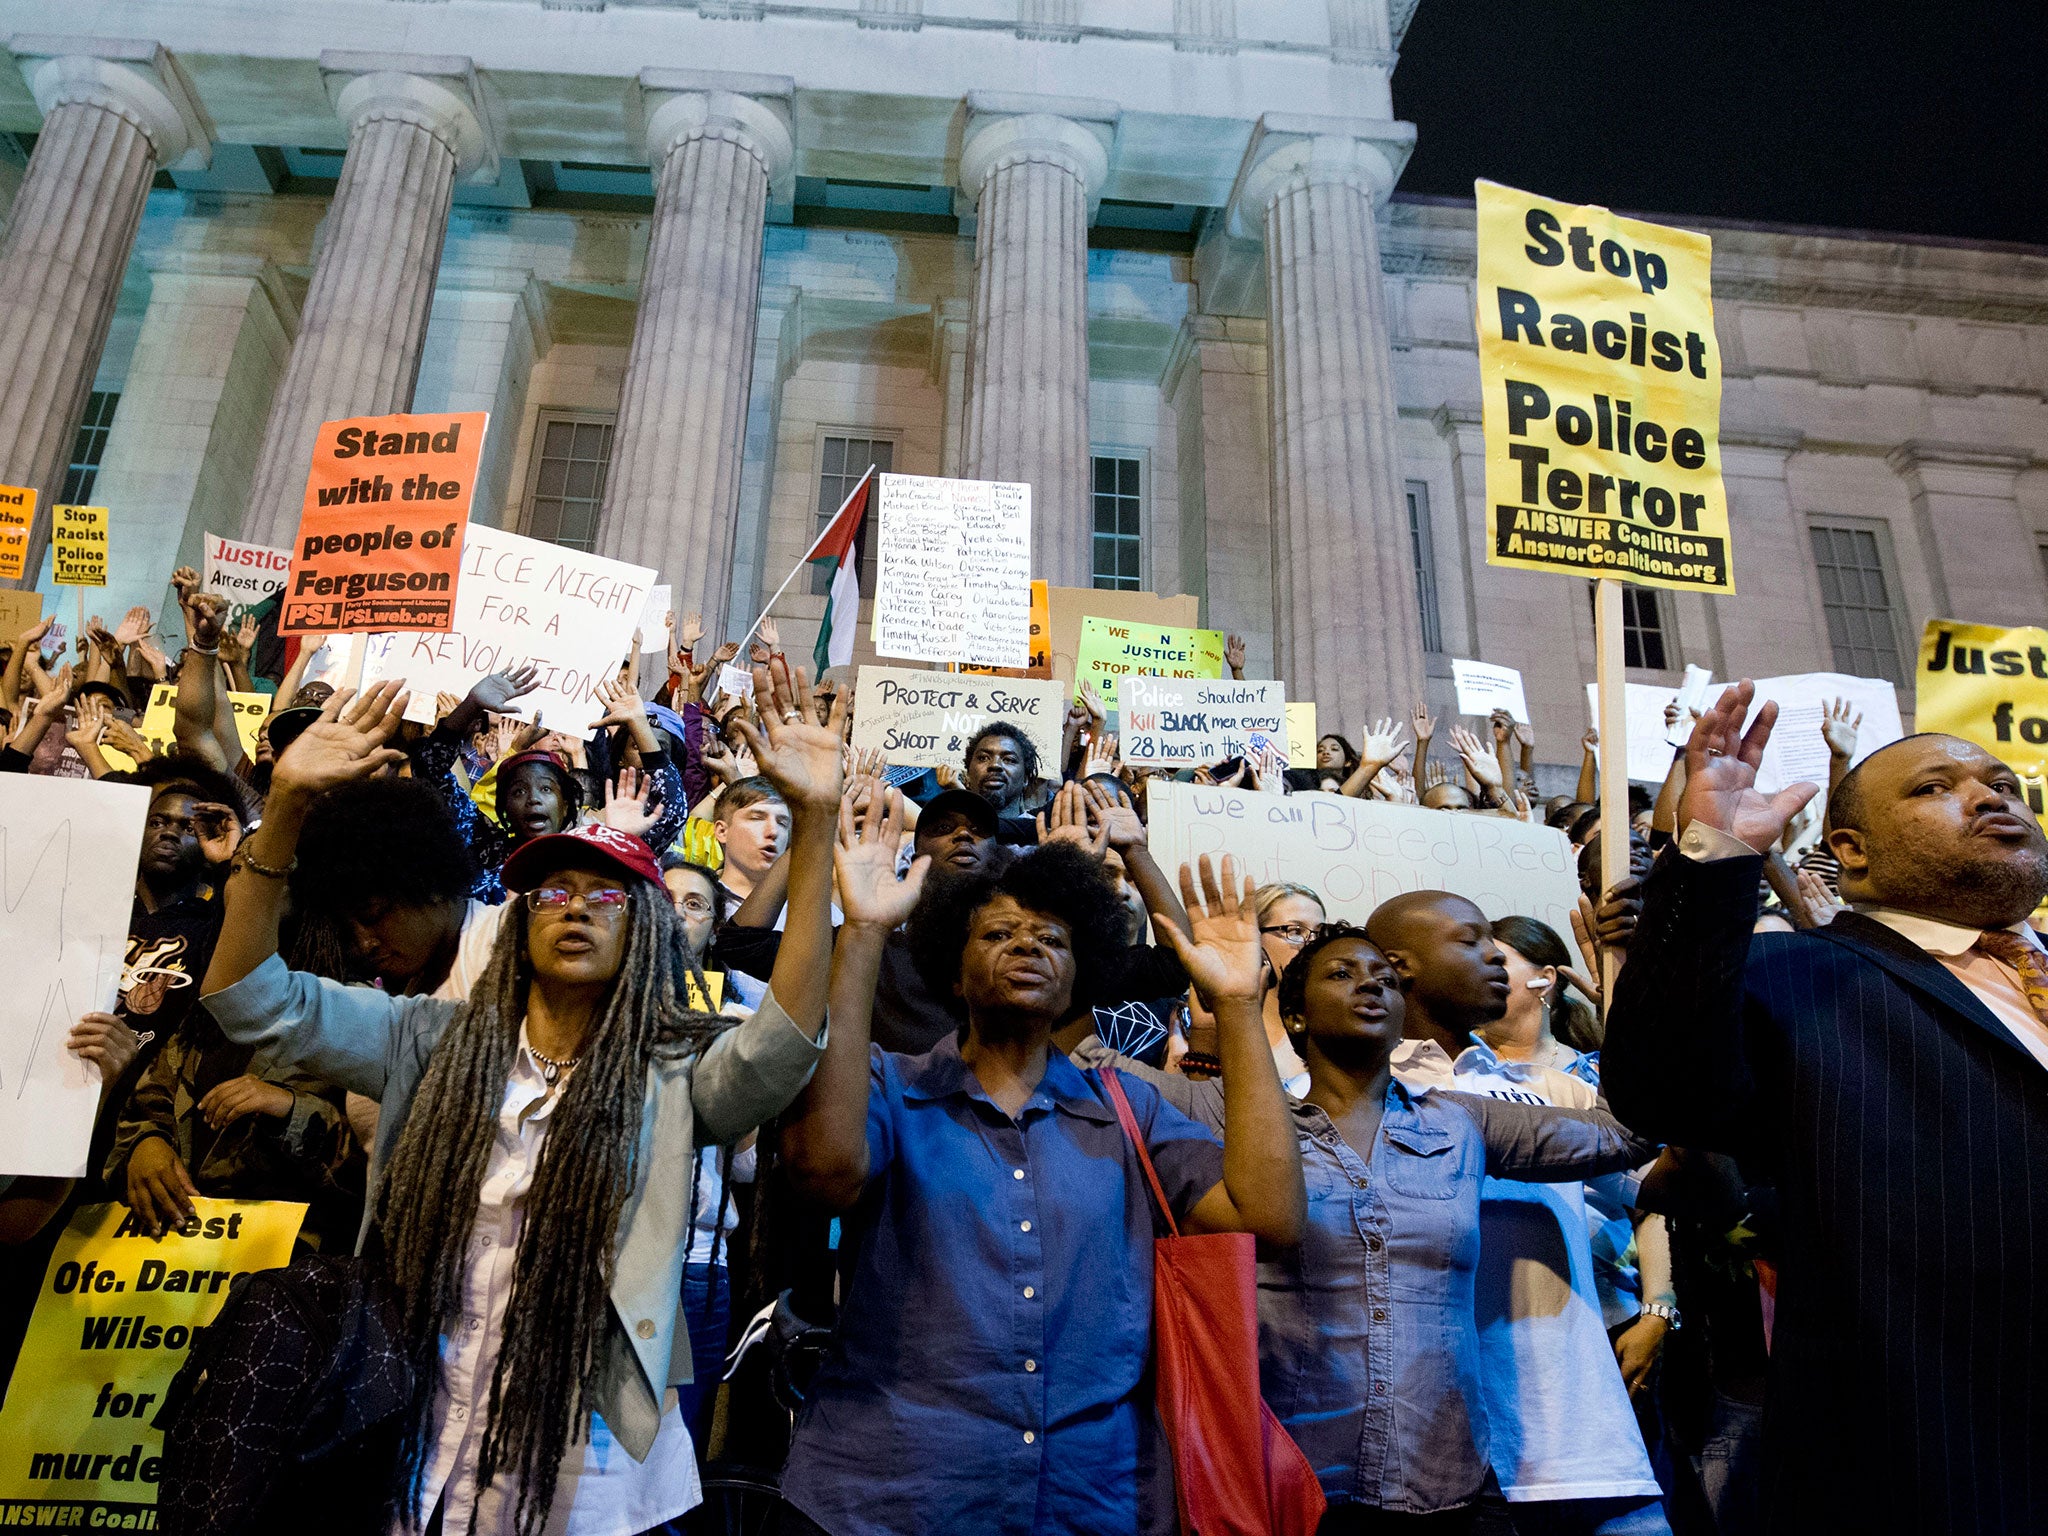 Demonstrators chant at the steps of the National Portrait Gallery in Washington, during a protest against the shooting of unarmed Michael Brown, a black 18-year-old killed by a white police officer in Ferguson